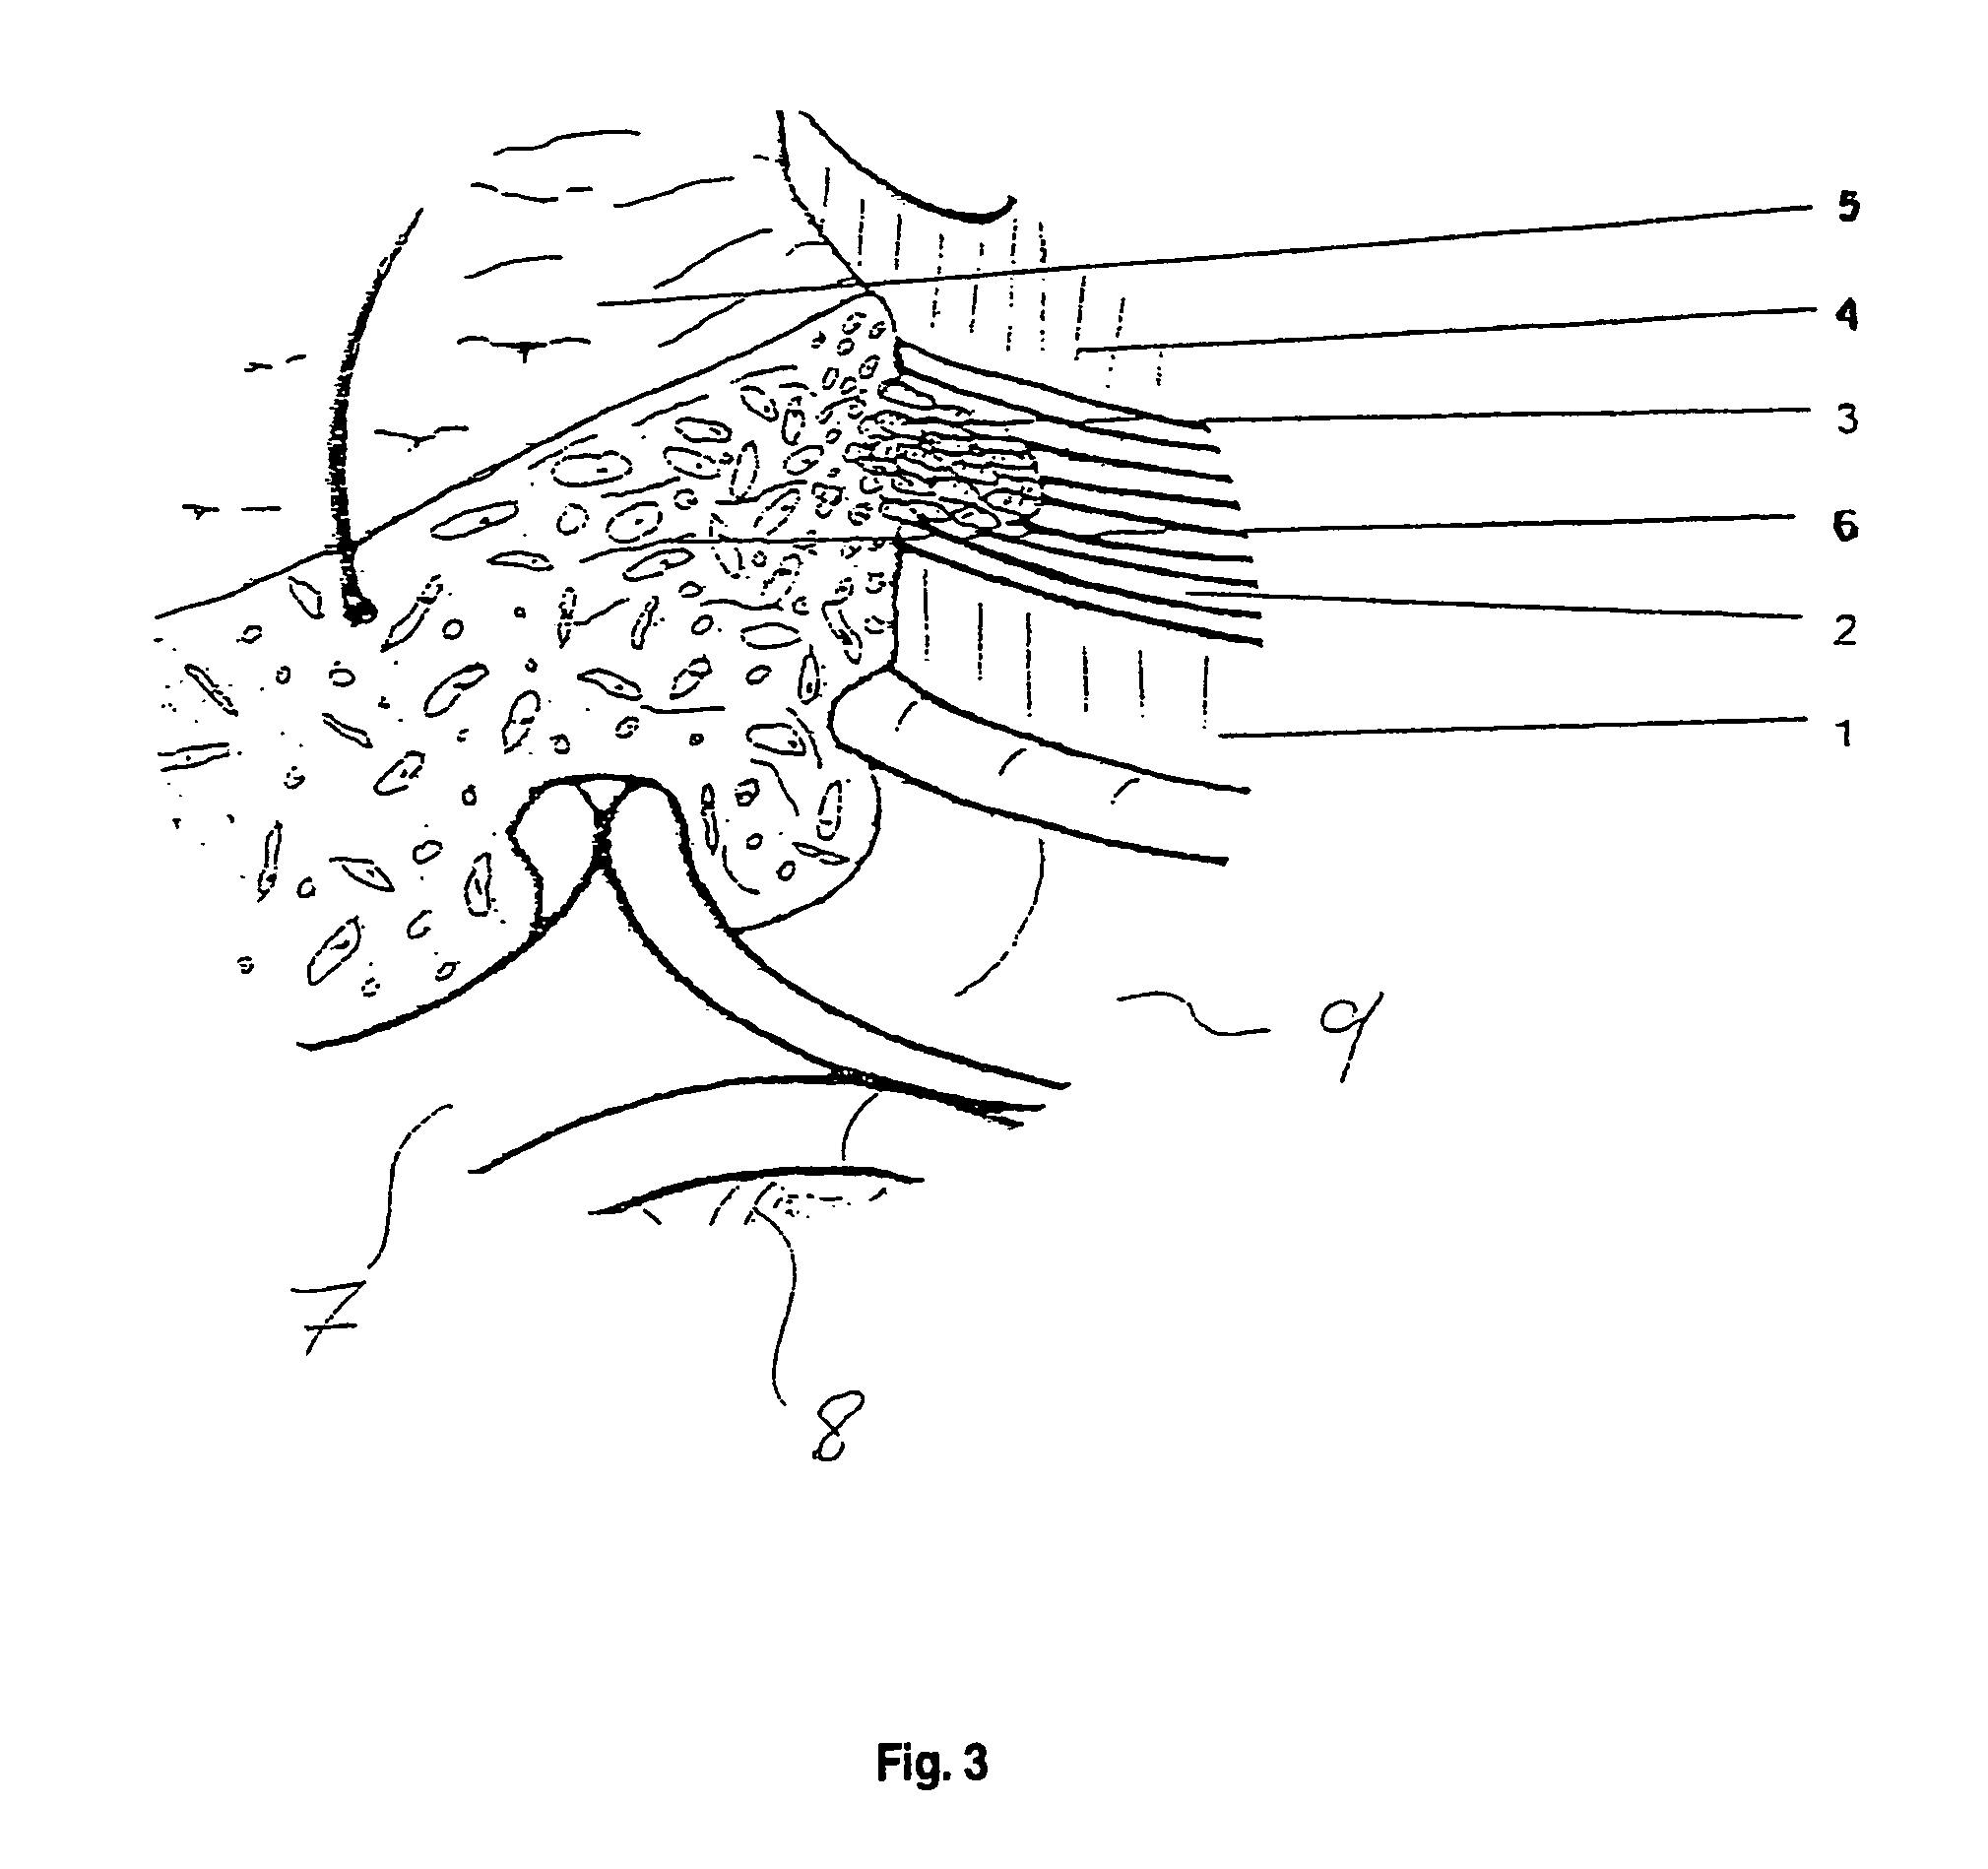 Implant with surface structure